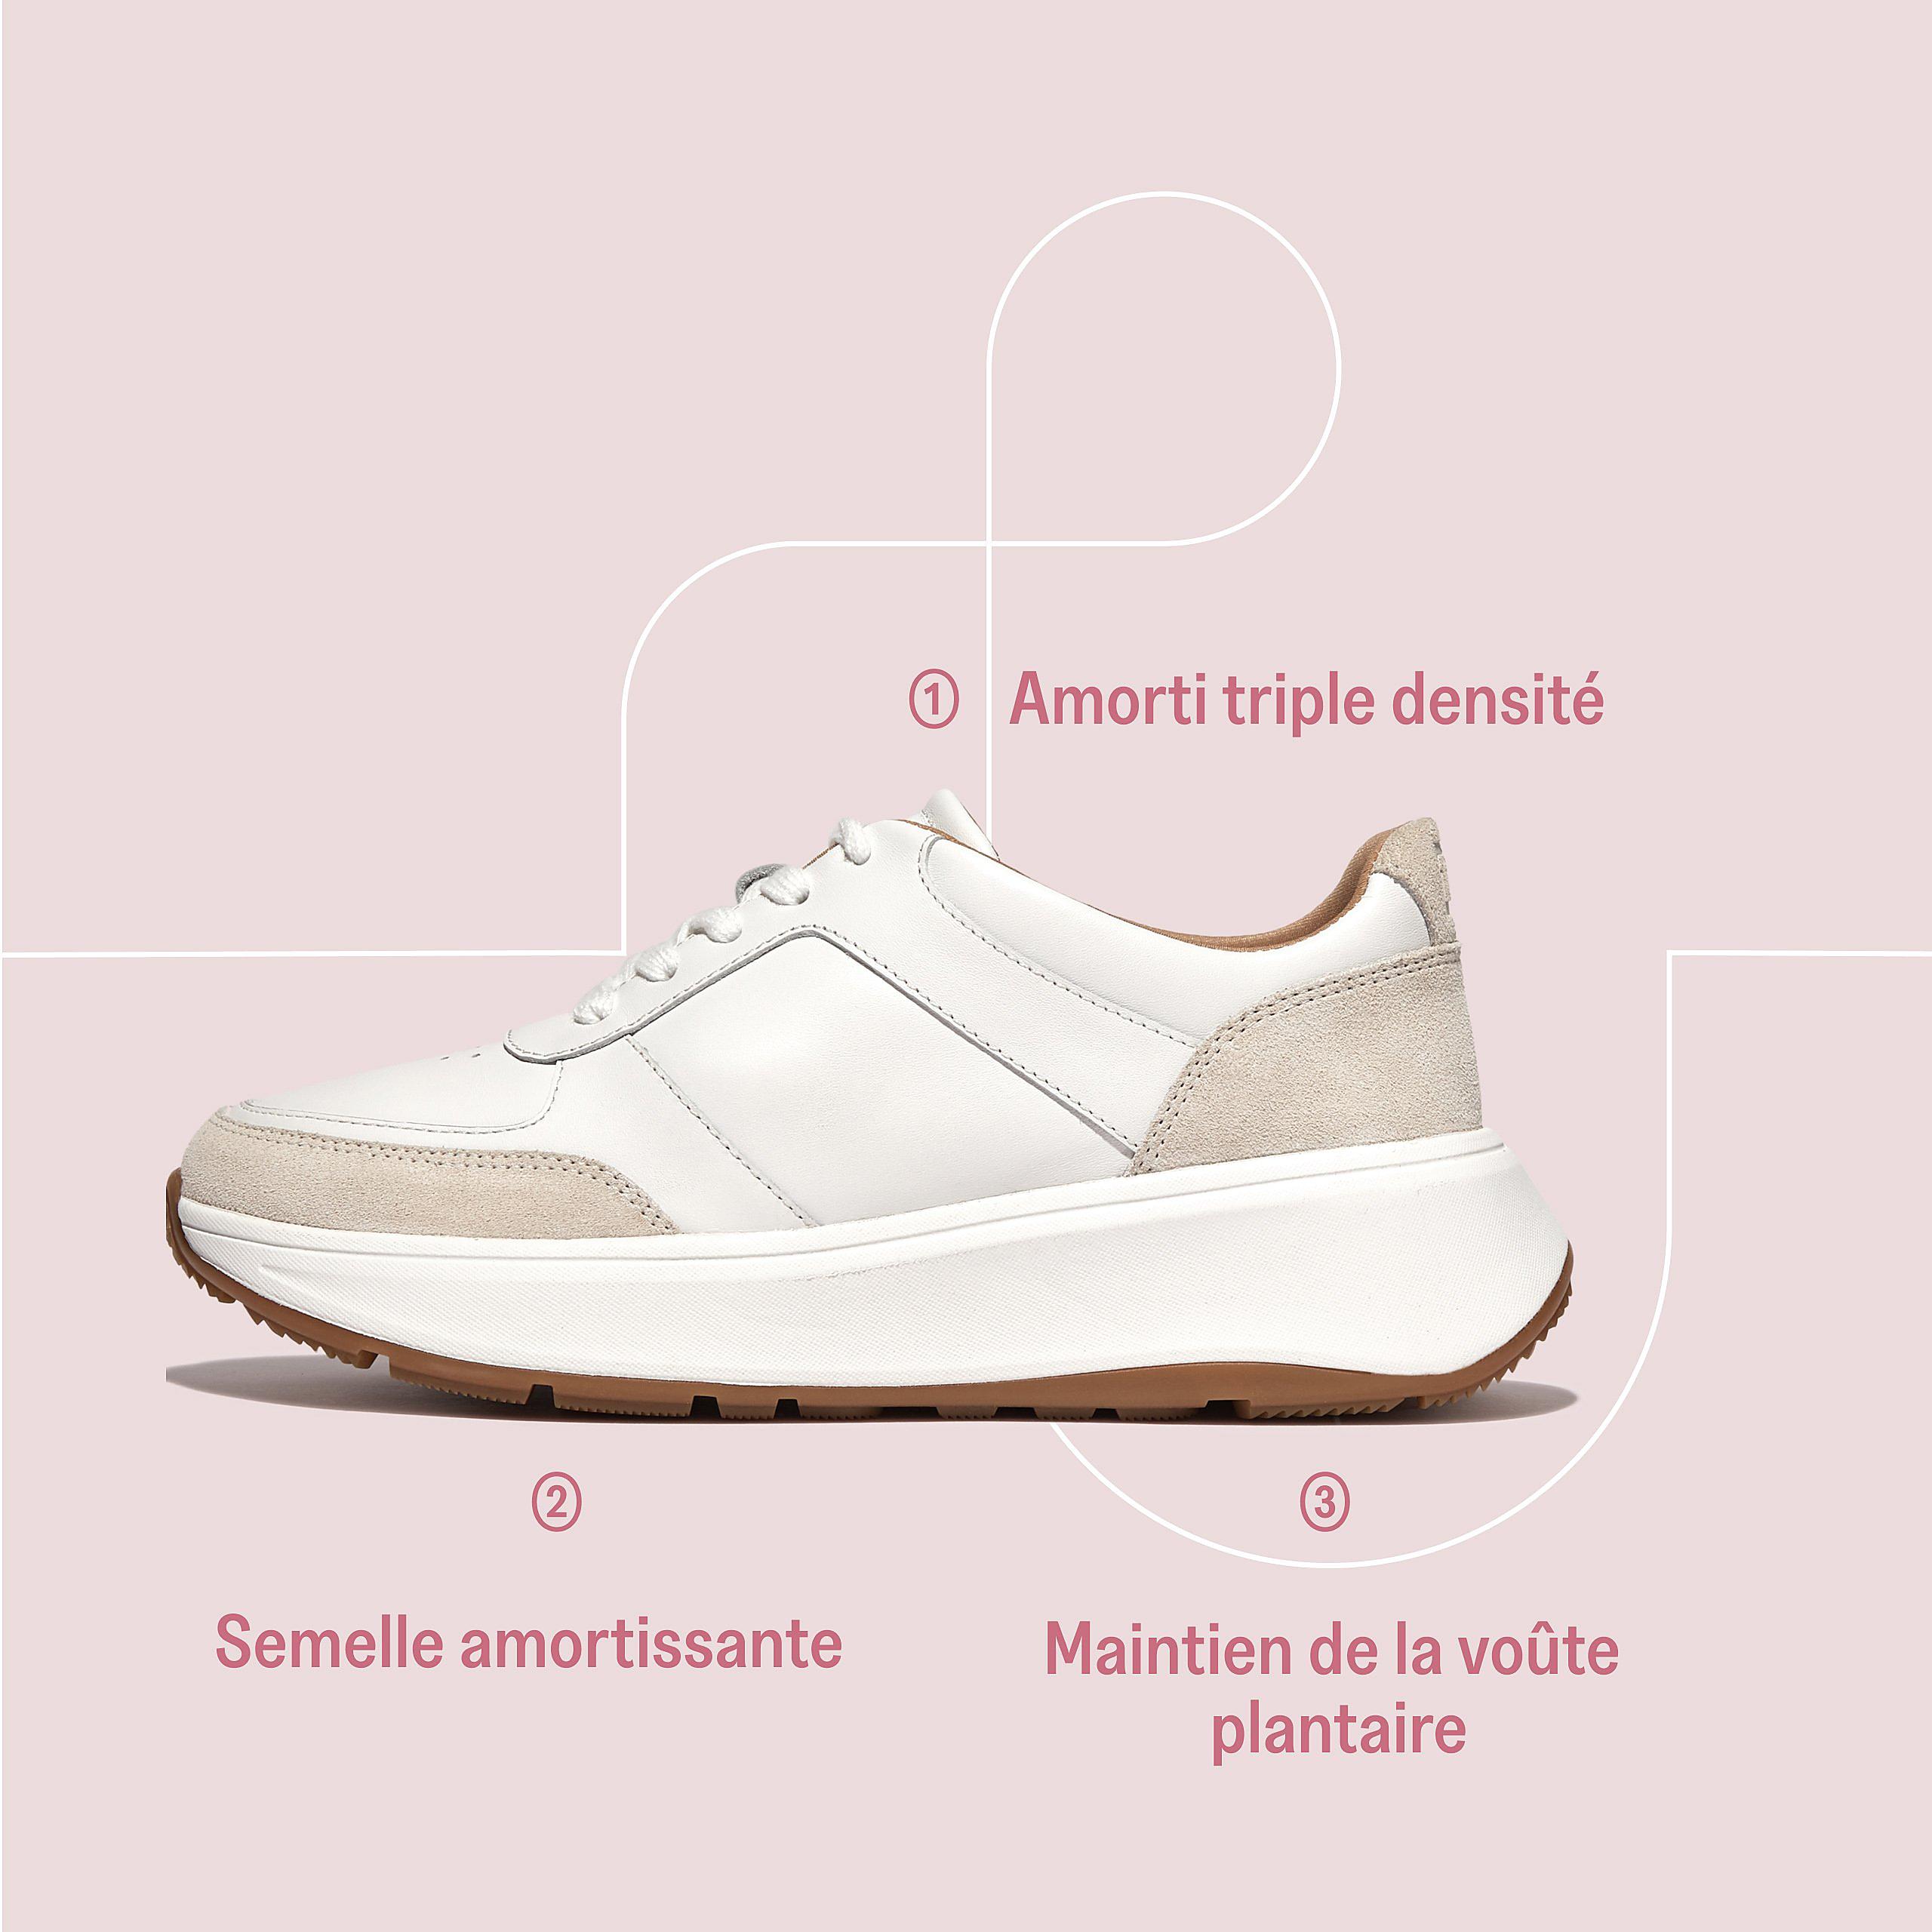 white rally trainer featuring the anatomicush technology